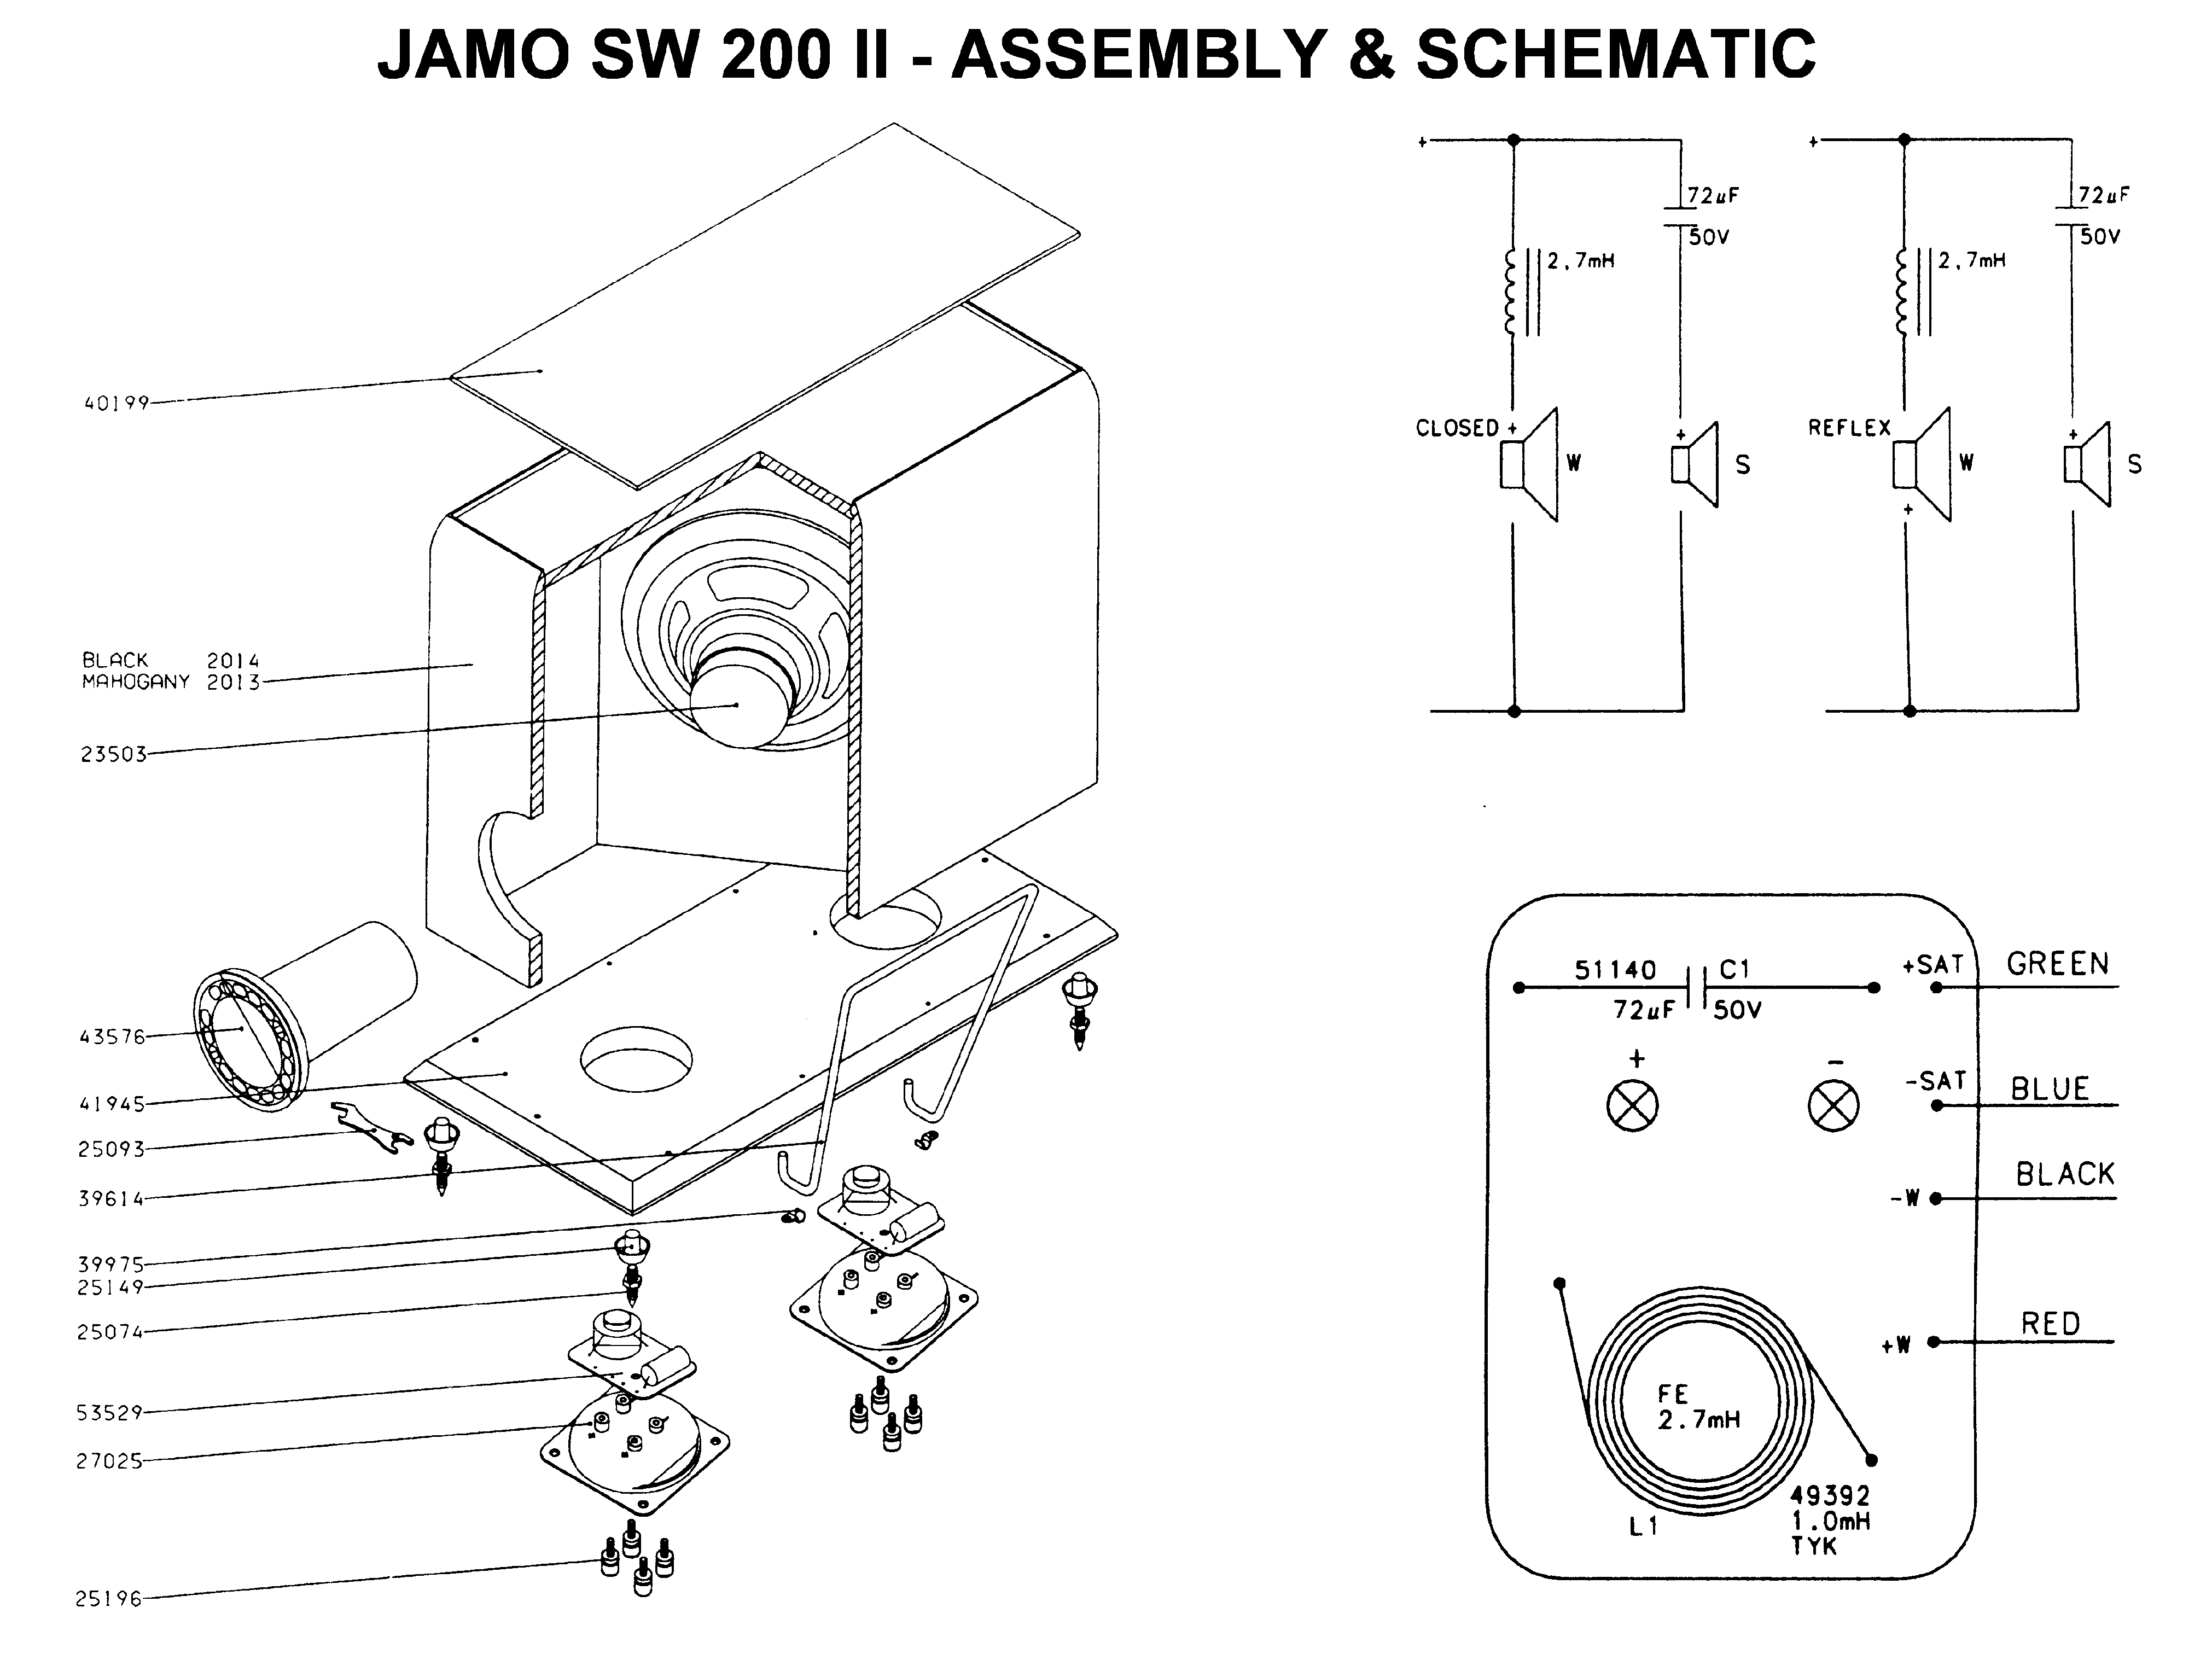 Refinamiento Magnético Licuar JAMO SW 200 II SCHEMATIC ASSEMBLY Service Manual download, schematics,  eeprom, repair info for electronics experts